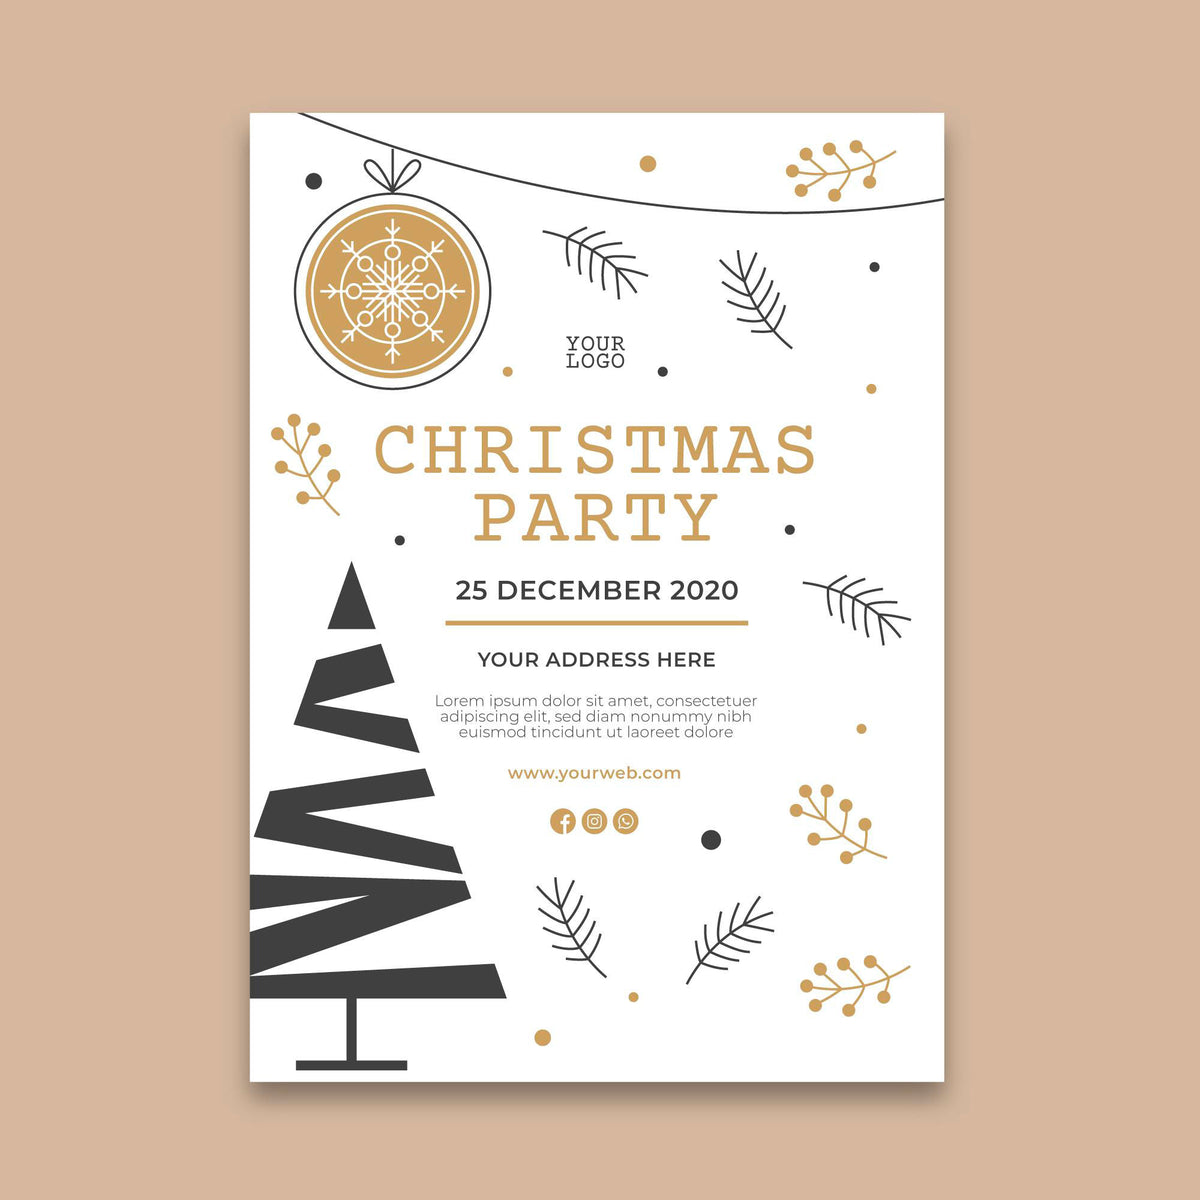 Plantable Fun & Friends Christmas Eco Greetings & Party Invitations